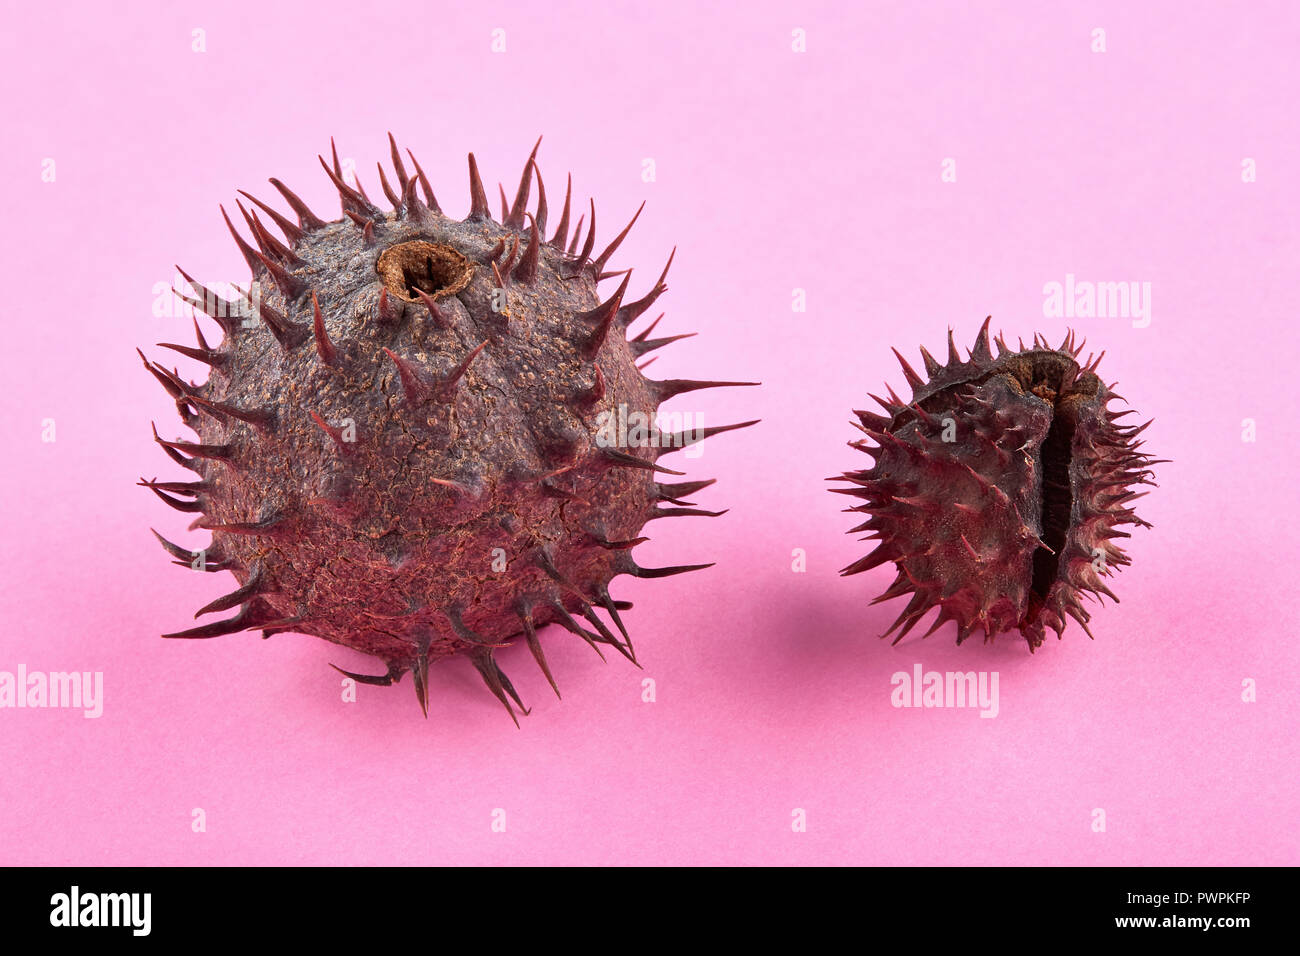 Two chestnuts with thorny peel on pink background. Stock Photo